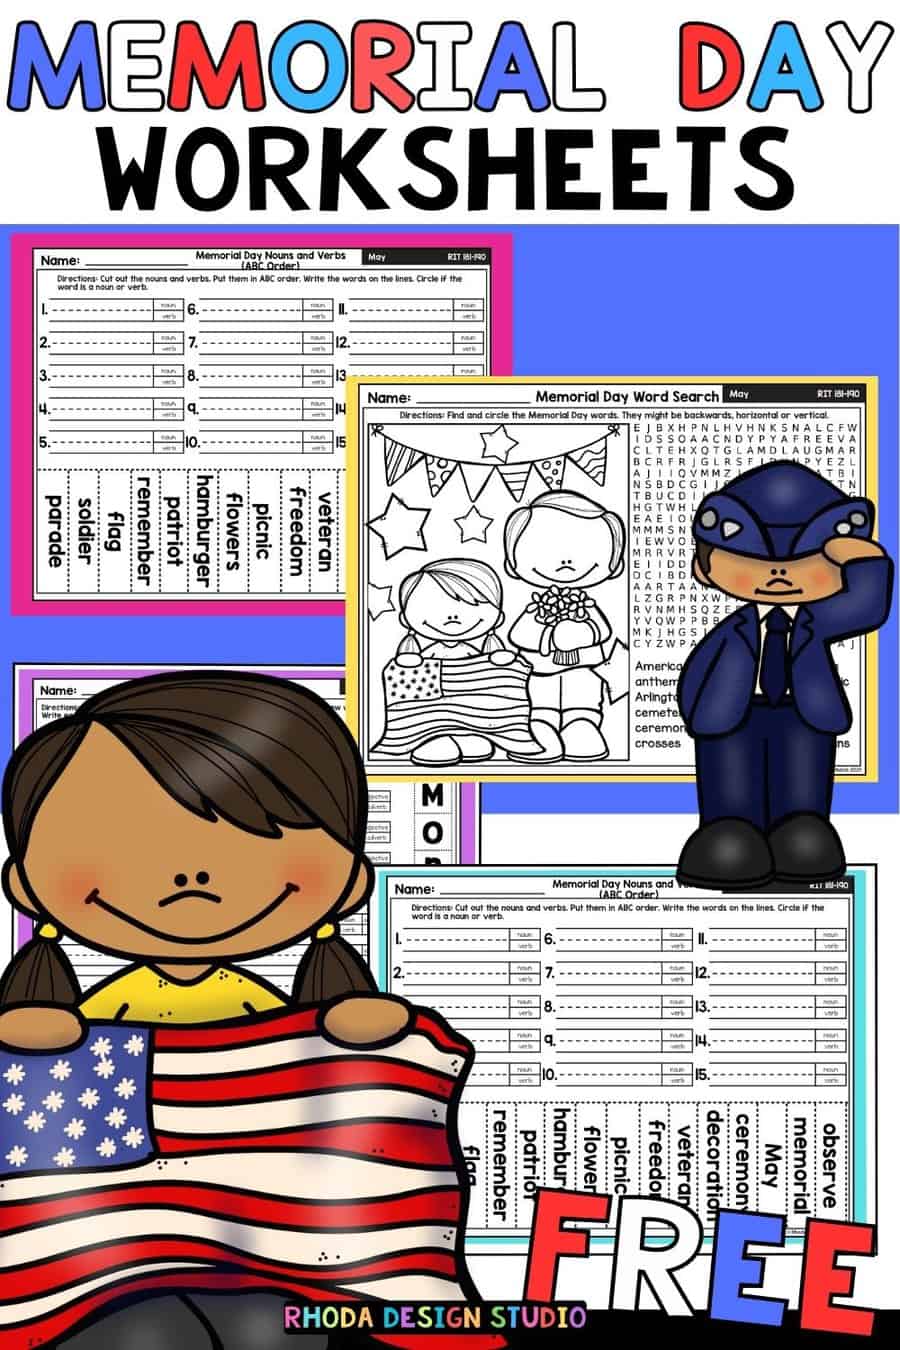 Free Memorial Day Worksheets: Word Search, ABC Order, Make New Words. Easy to print. No prep worksheets for teachers and homeschool.